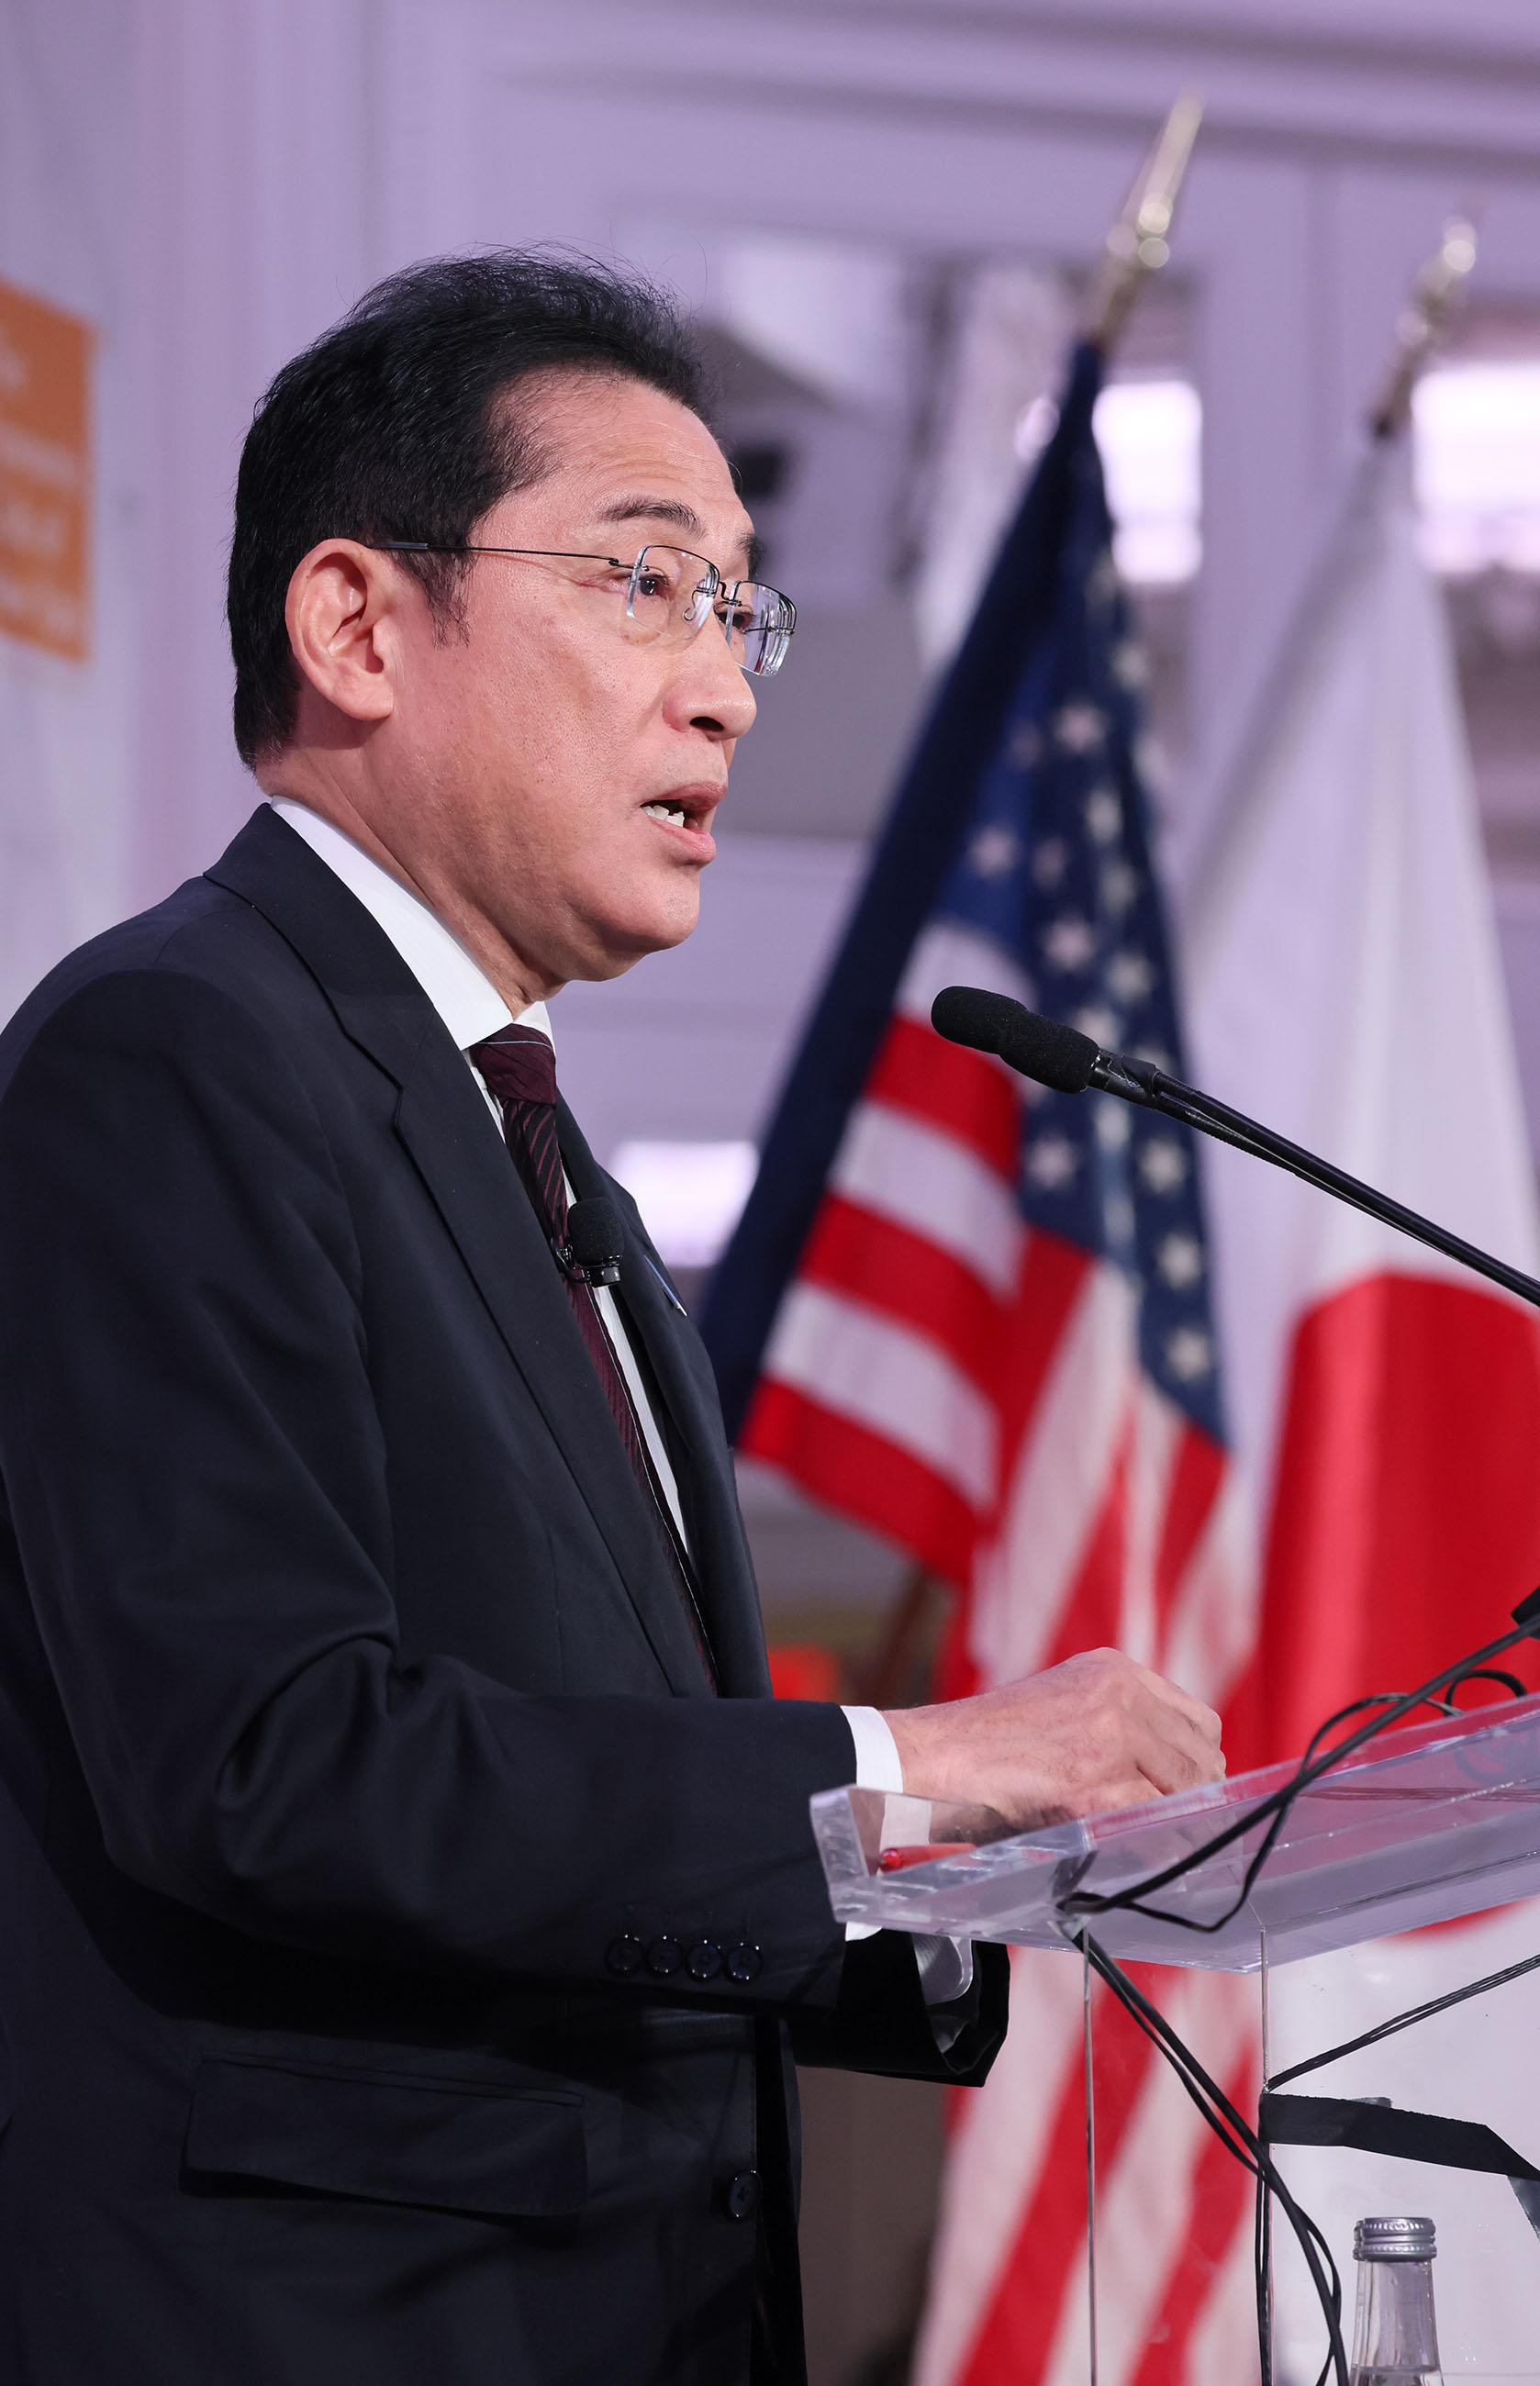 Prime Minister Kishida delivering his remarks to the Economic Club of New York (6)